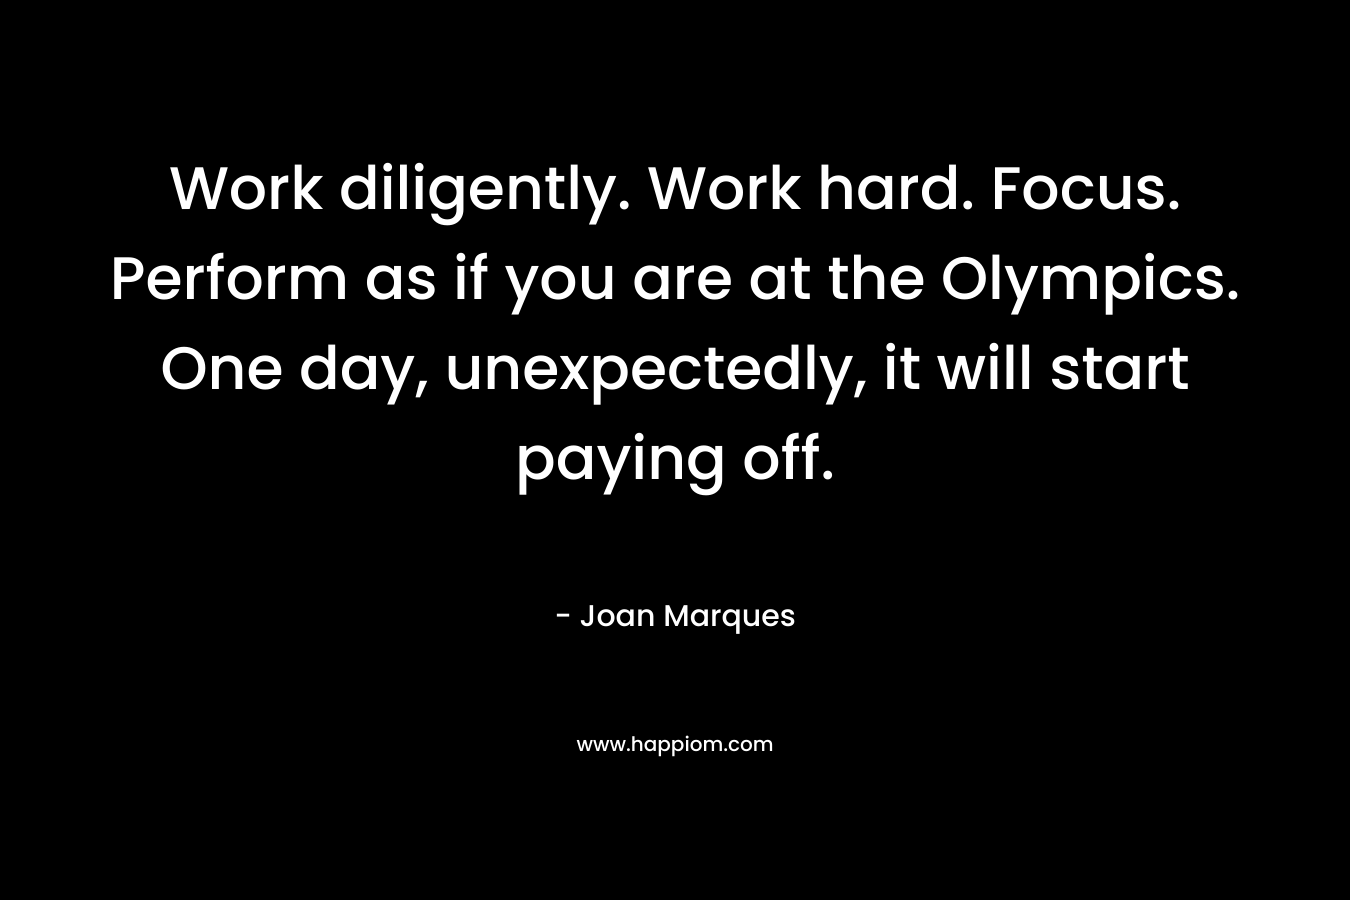 Work diligently. Work hard. Focus. Perform as if you are at the Olympics. One day, unexpectedly, it will start paying off.